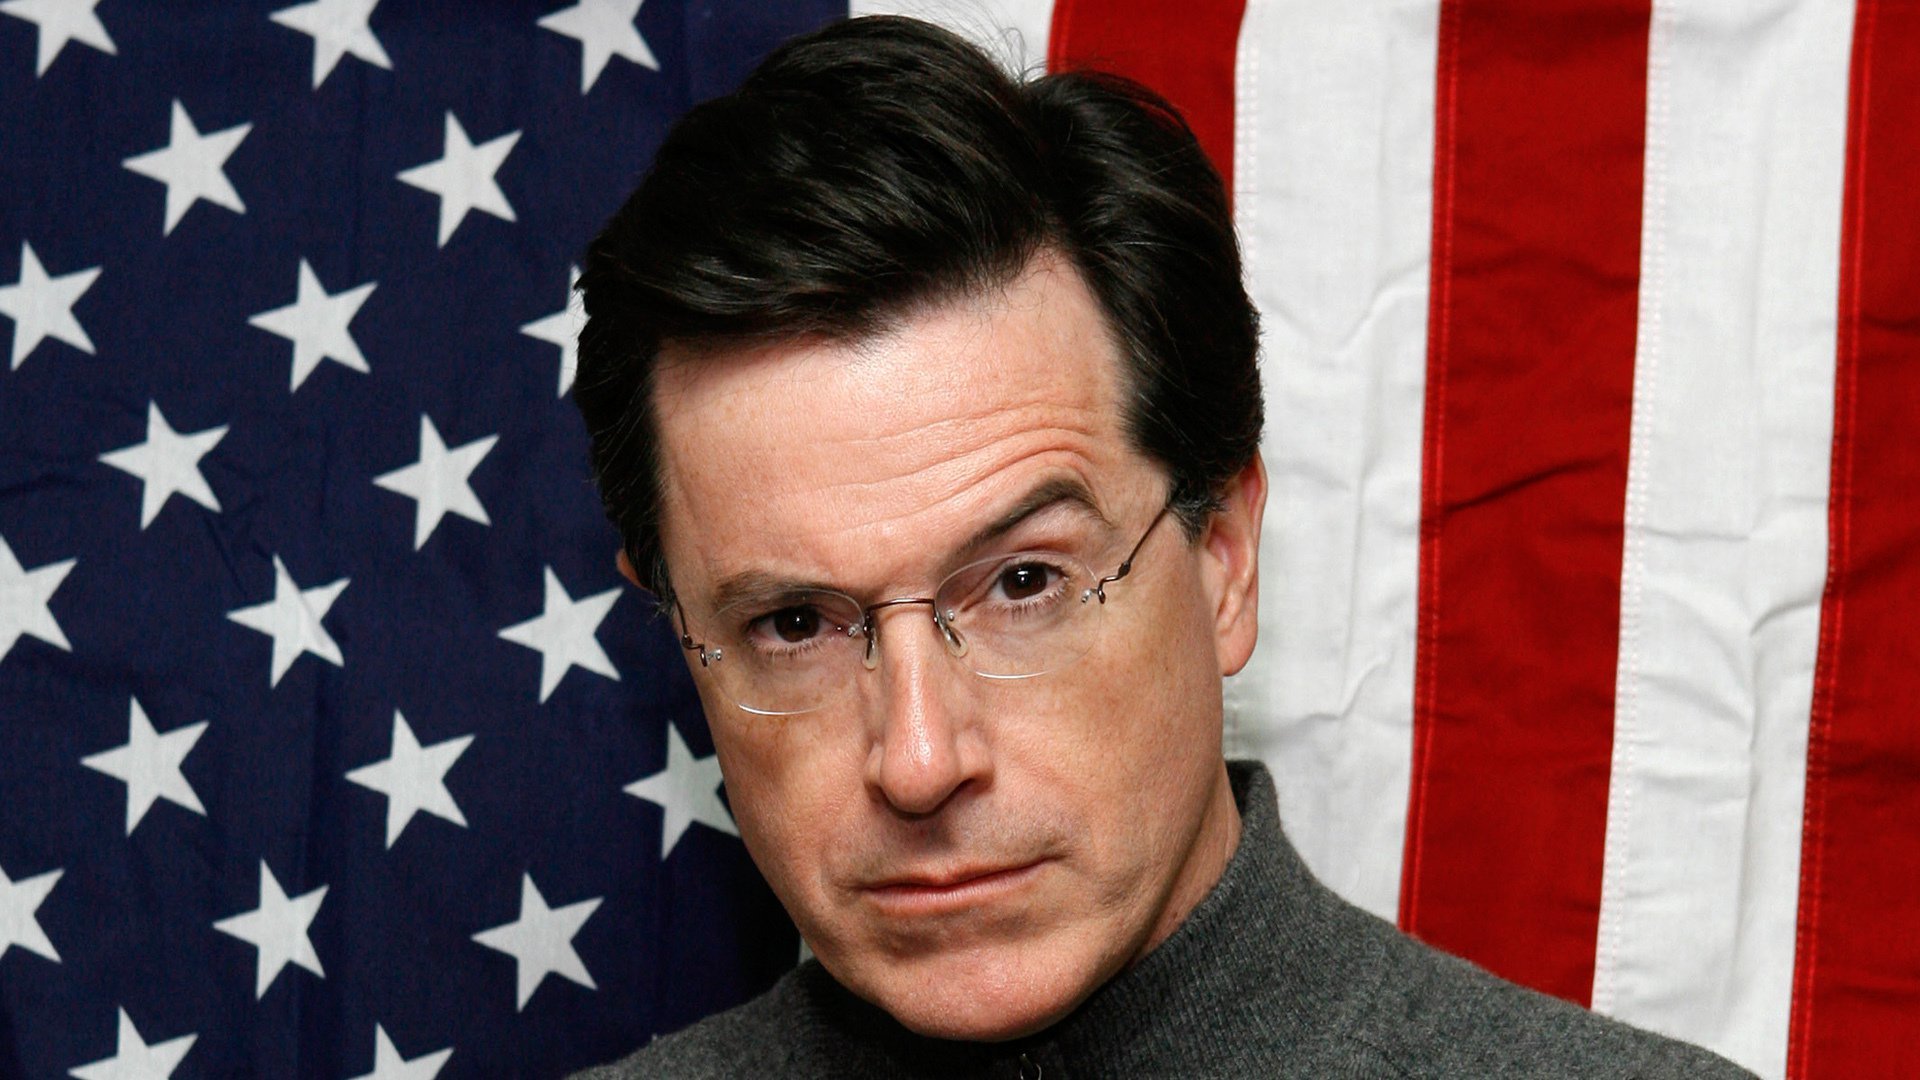 Download full hd 1920x1080 The Colbert Report PC background ID:322531 for free